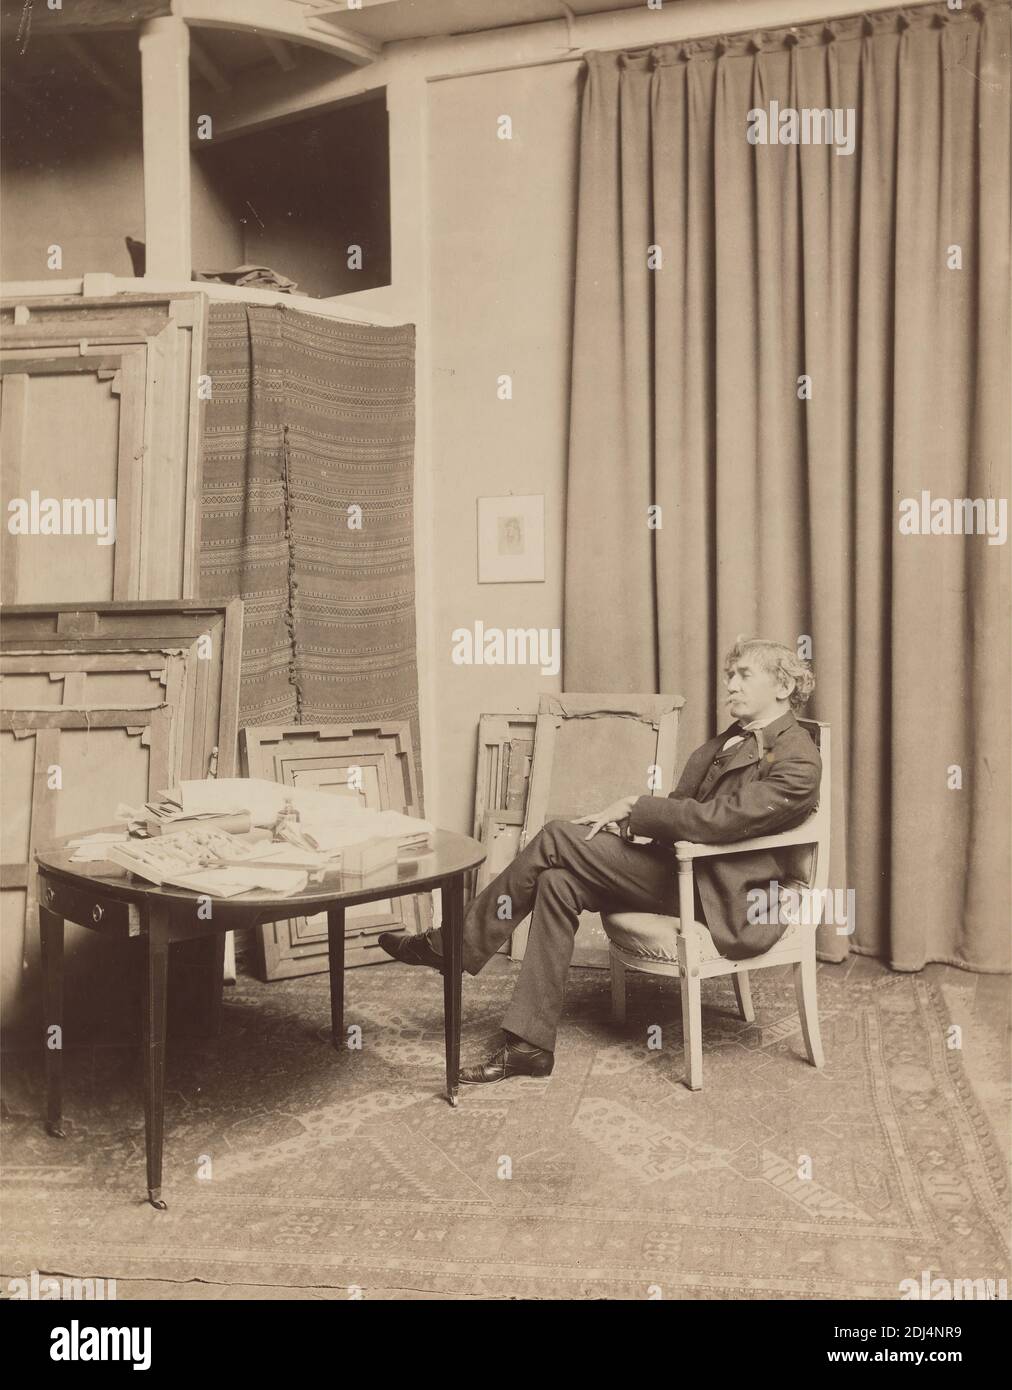 Whistler Seated in a Chair in His Paris (rue Notre-Dame-des-Champs) Studio, Paul François Arnold Cardon, called 'Dornac', 1859–1941, French, 1893, Albumen print on thin, smooth, wove paper, Sheet: 10 1/4 x 8 inches (26 x 20.3 cm) and Mount: 17 × 14 inches (43.2 × 35.6 cm), artist, books, bottle, box, chair, coat, collar, curtains, drawer (furniture component), man, painter, paintings, paper, portrait, printmaker, rafters, rug, shoes, studio (work space), table, tie, trousers, vest, Europe, France, Paris Stock Photo